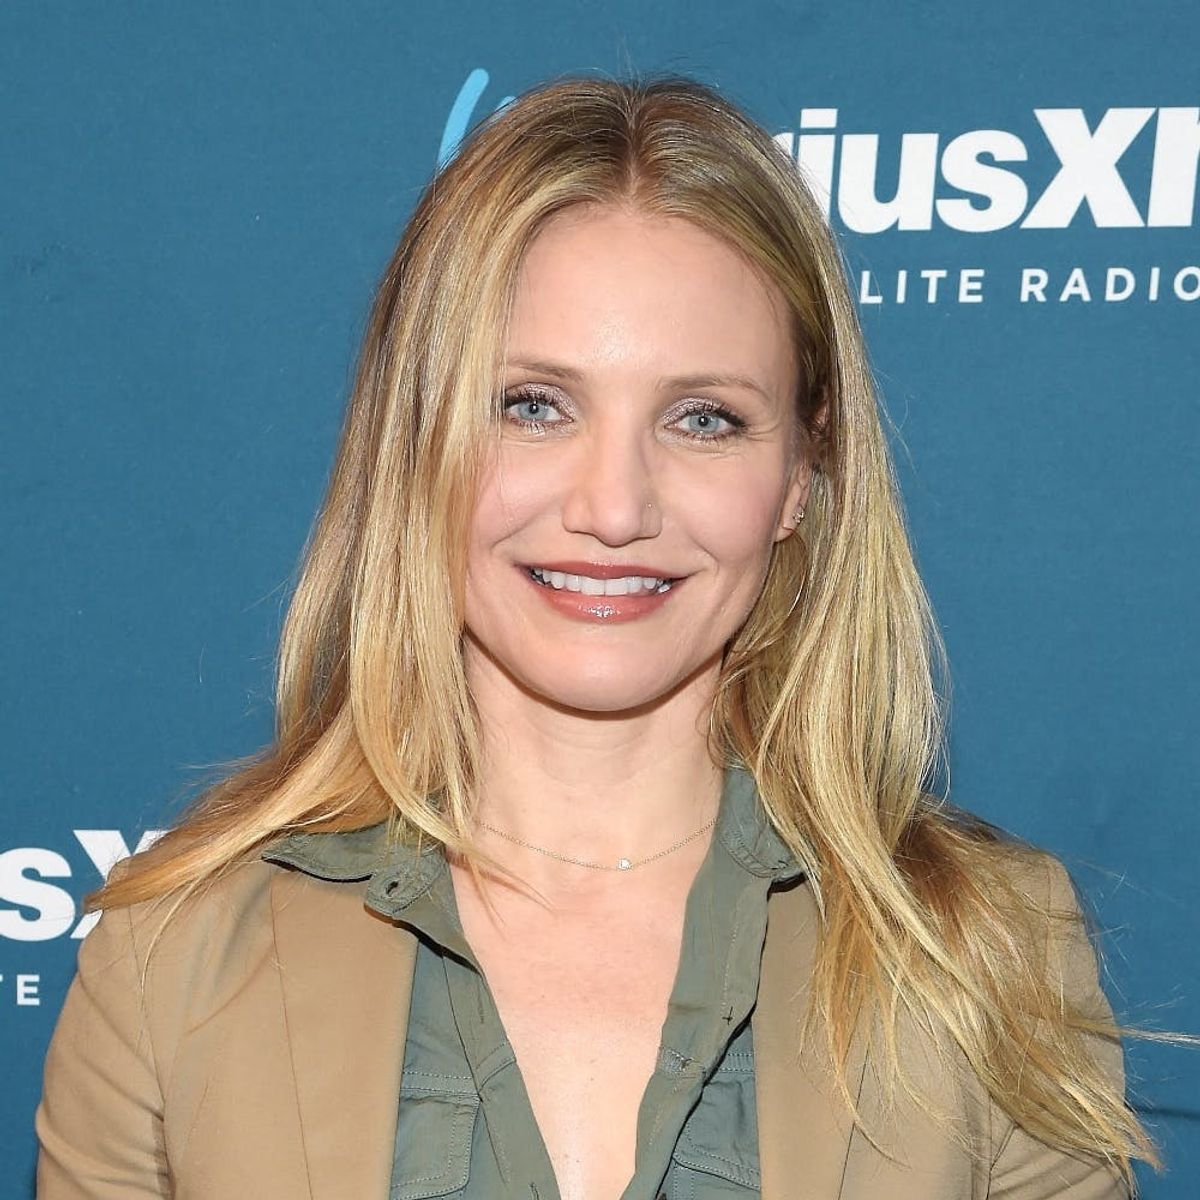 Cameron Diaz Reveals Why She Waited Until 41 to Get Married